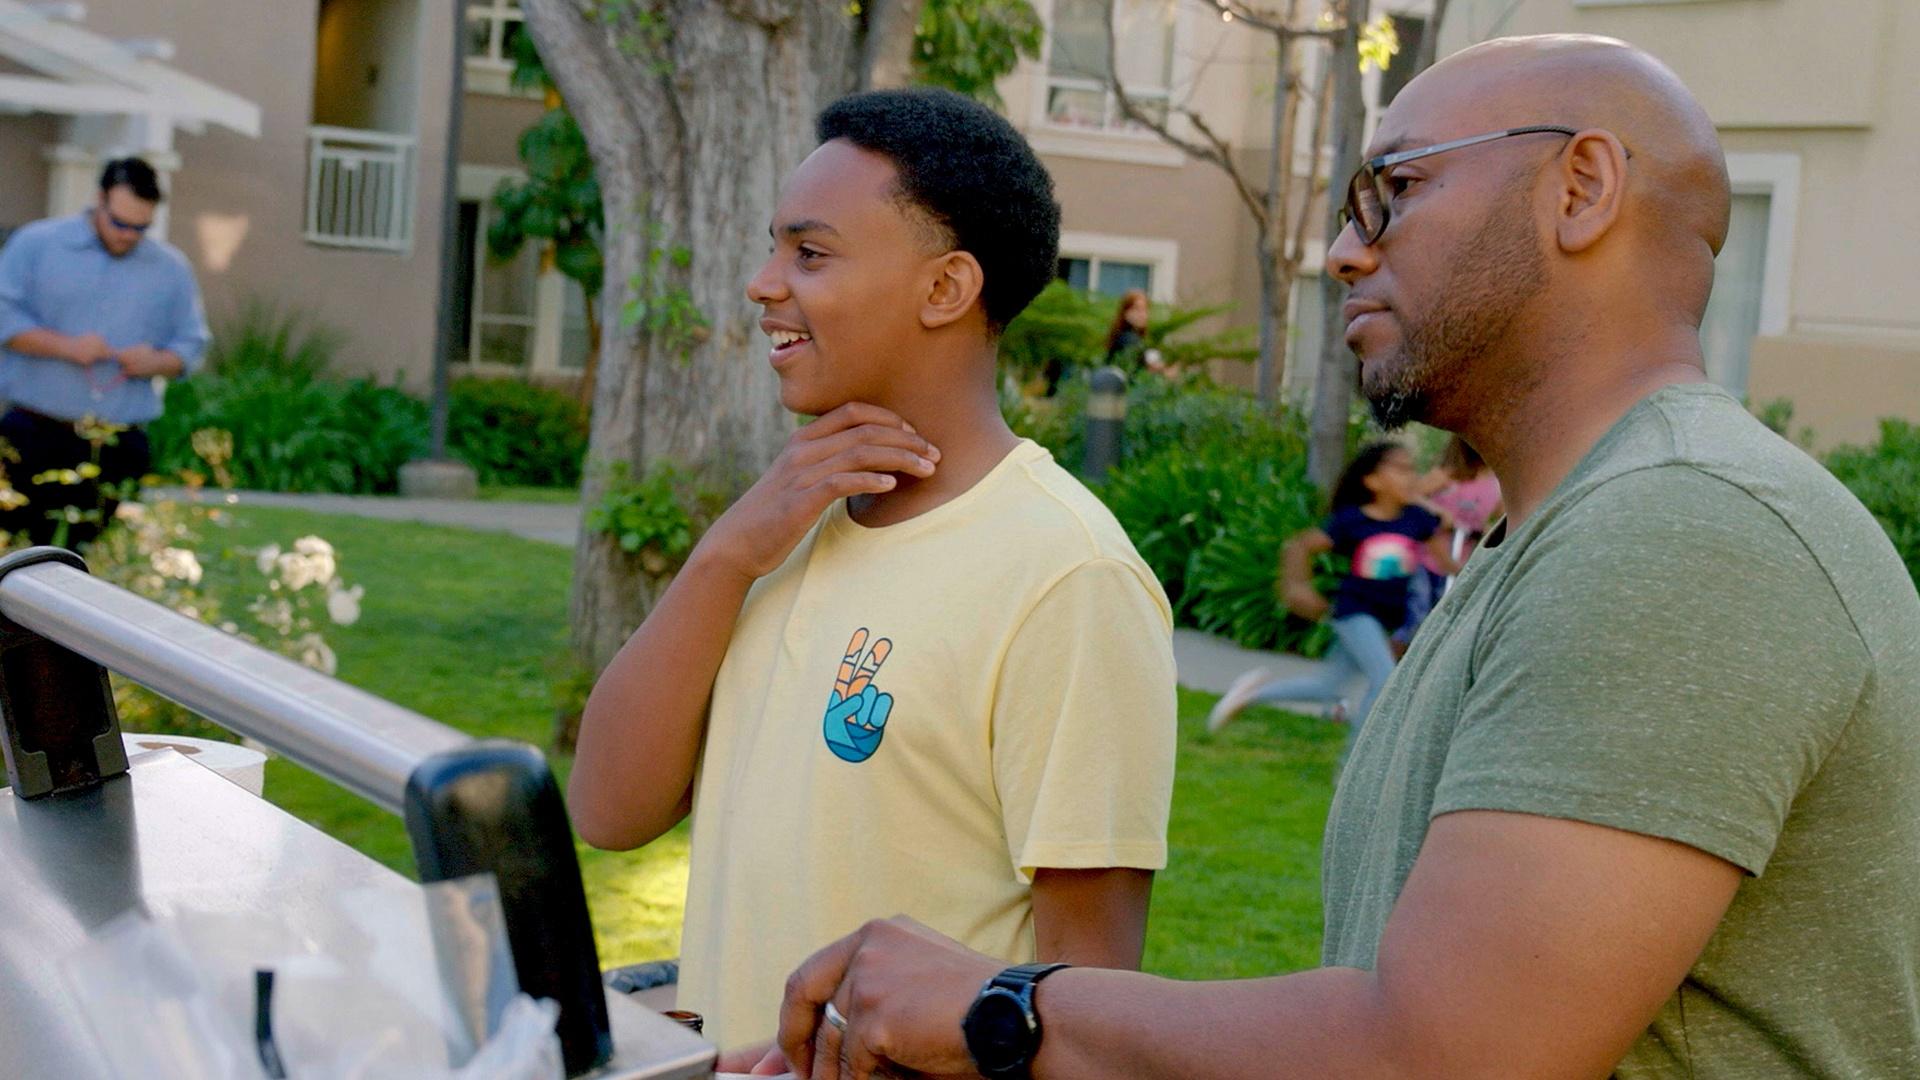 Dell Parks, a young autistic man, assisting his dad Wendell at a neighborhood cookout.